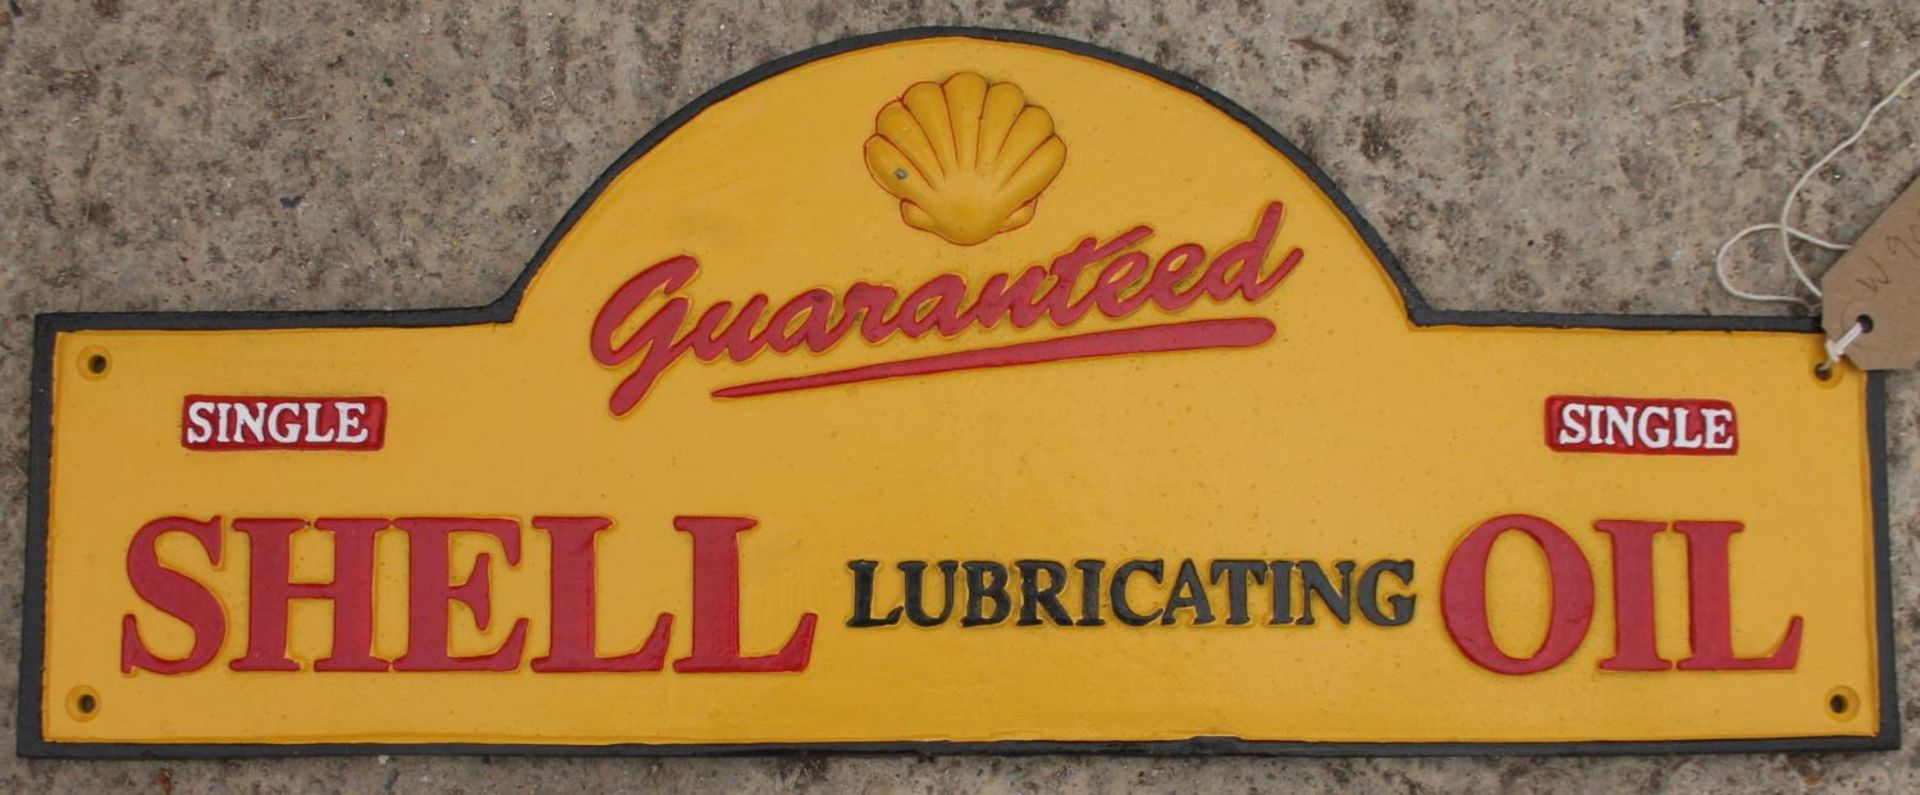 SHELL LUBRICATING OIL CAST IRON SIGN NO VAT